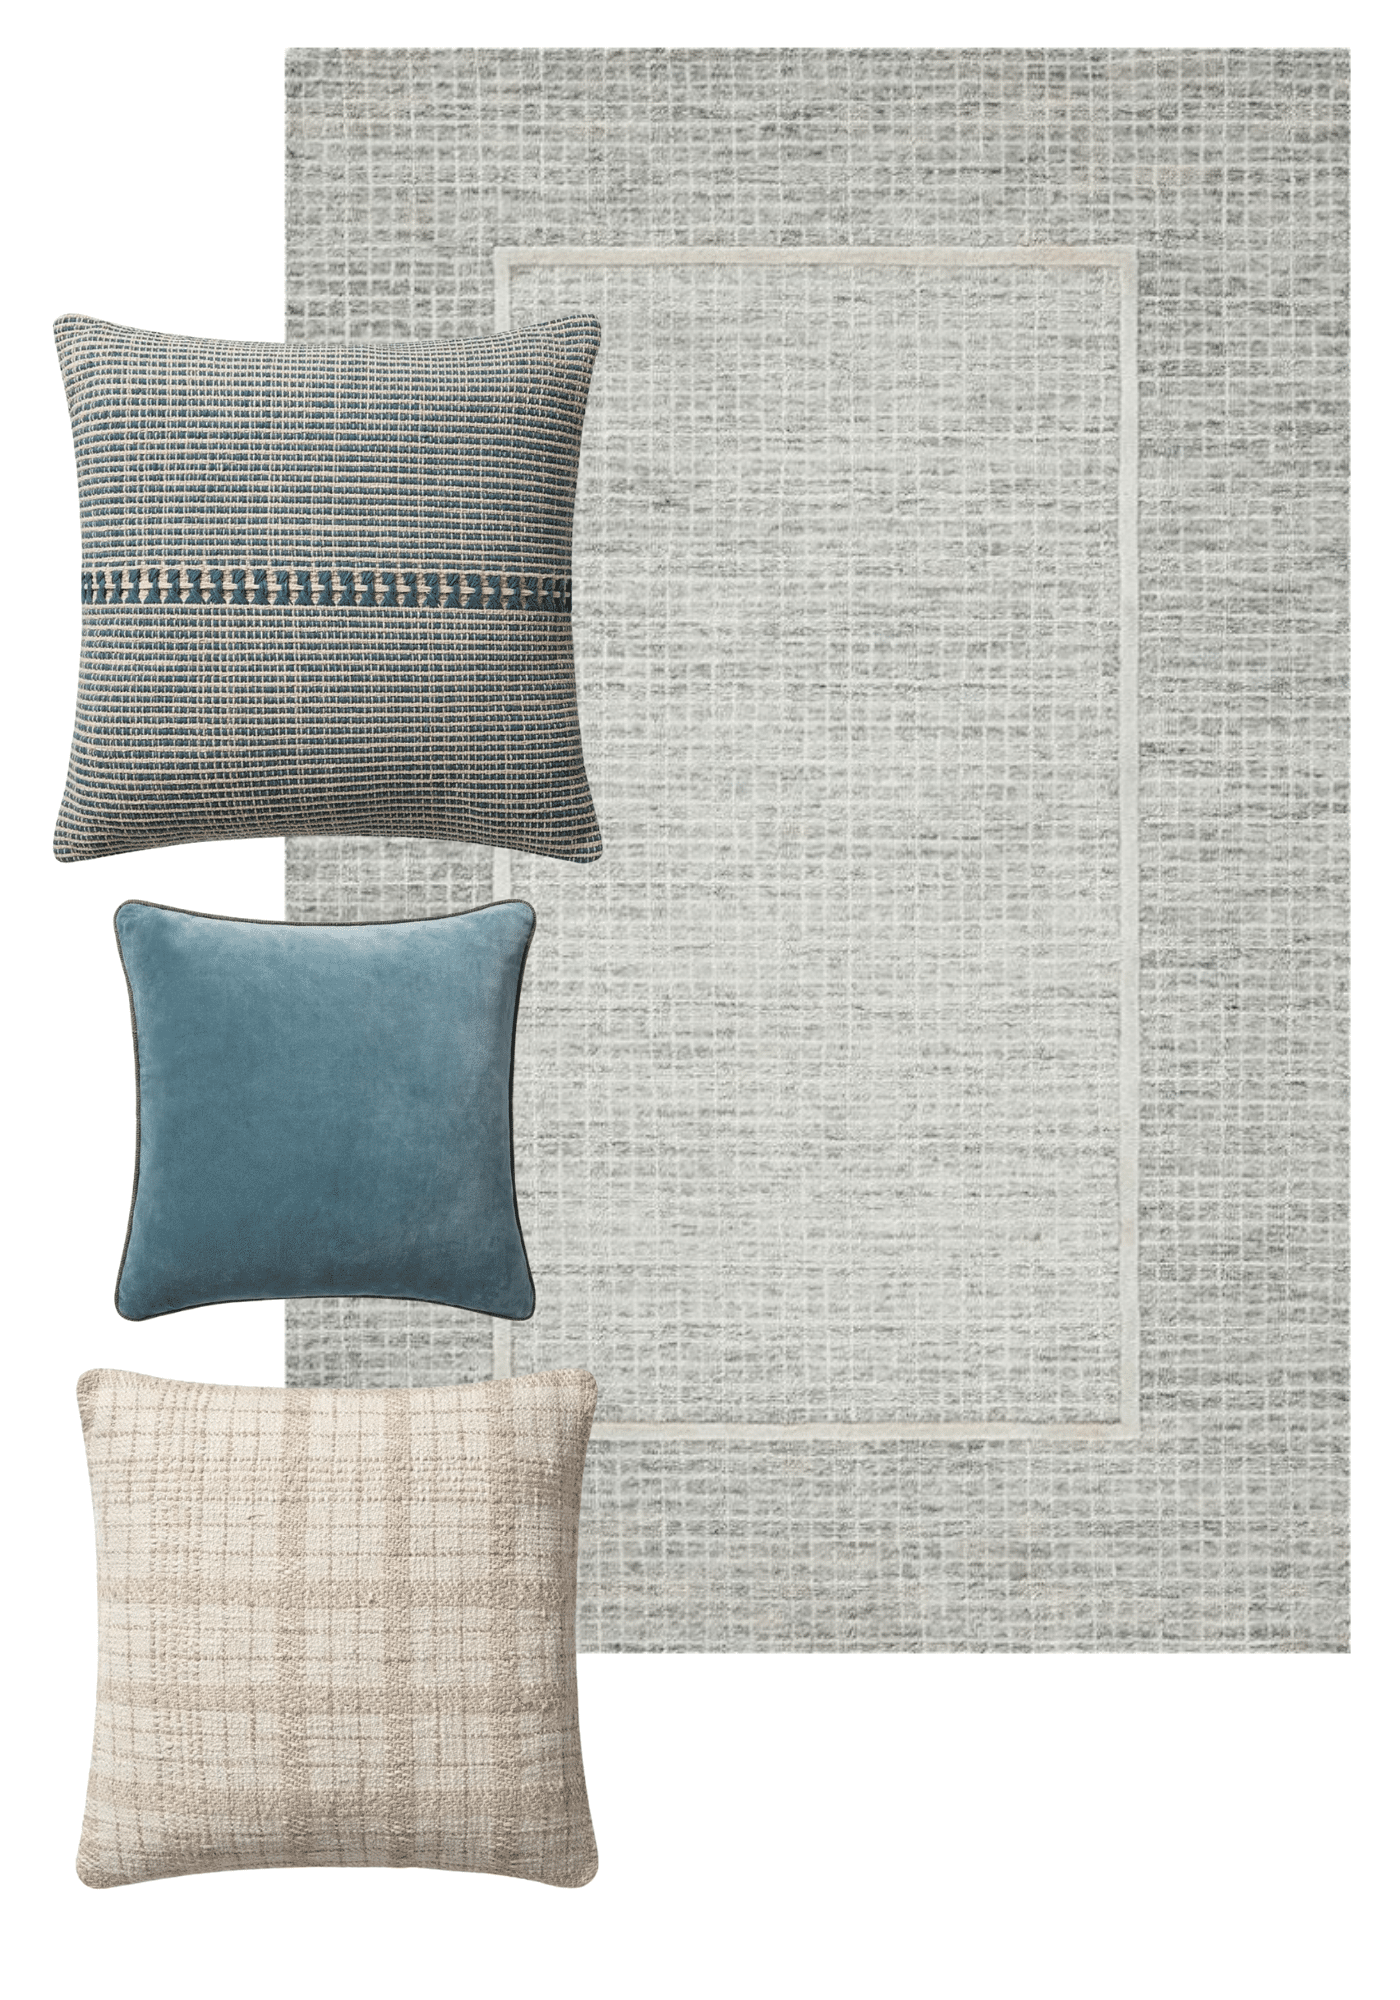 Chris Loves Julia | My Favorite Pillow & Rug Pairings | Briggs Rug in Mist Ivory with Pillows